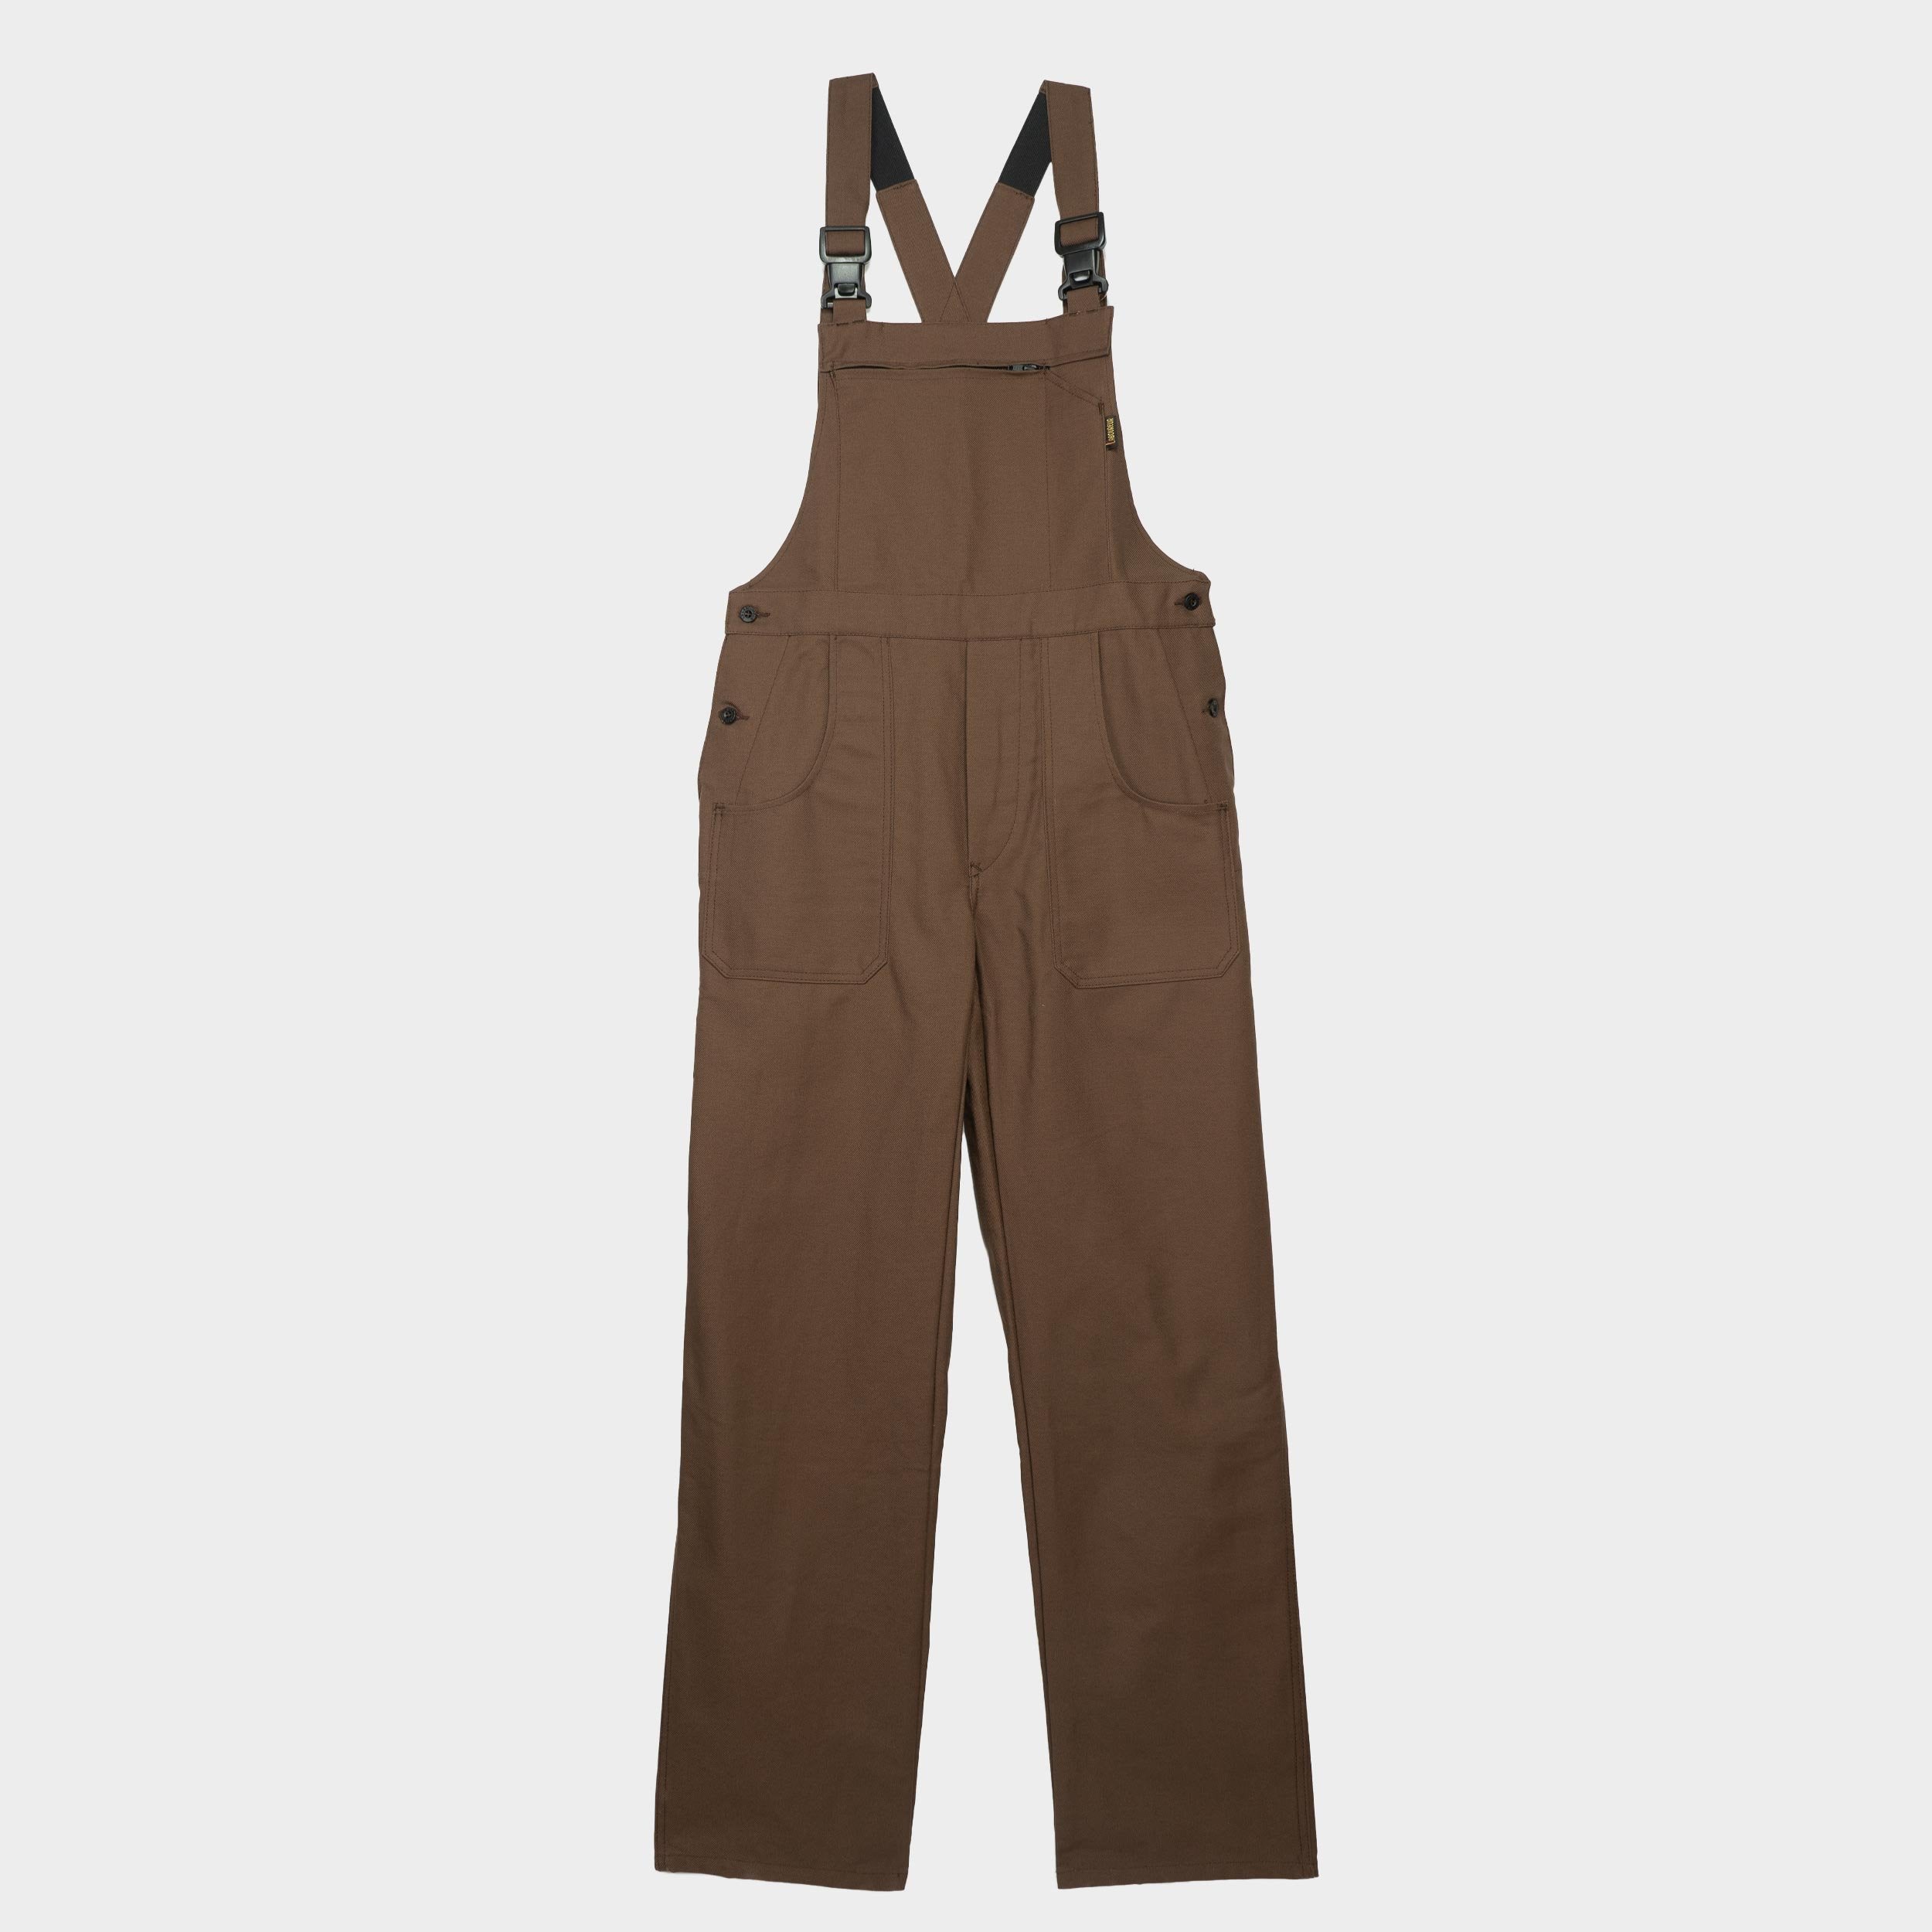 Le Laboureur for Gardenheir French Cotton Overalls in Brown